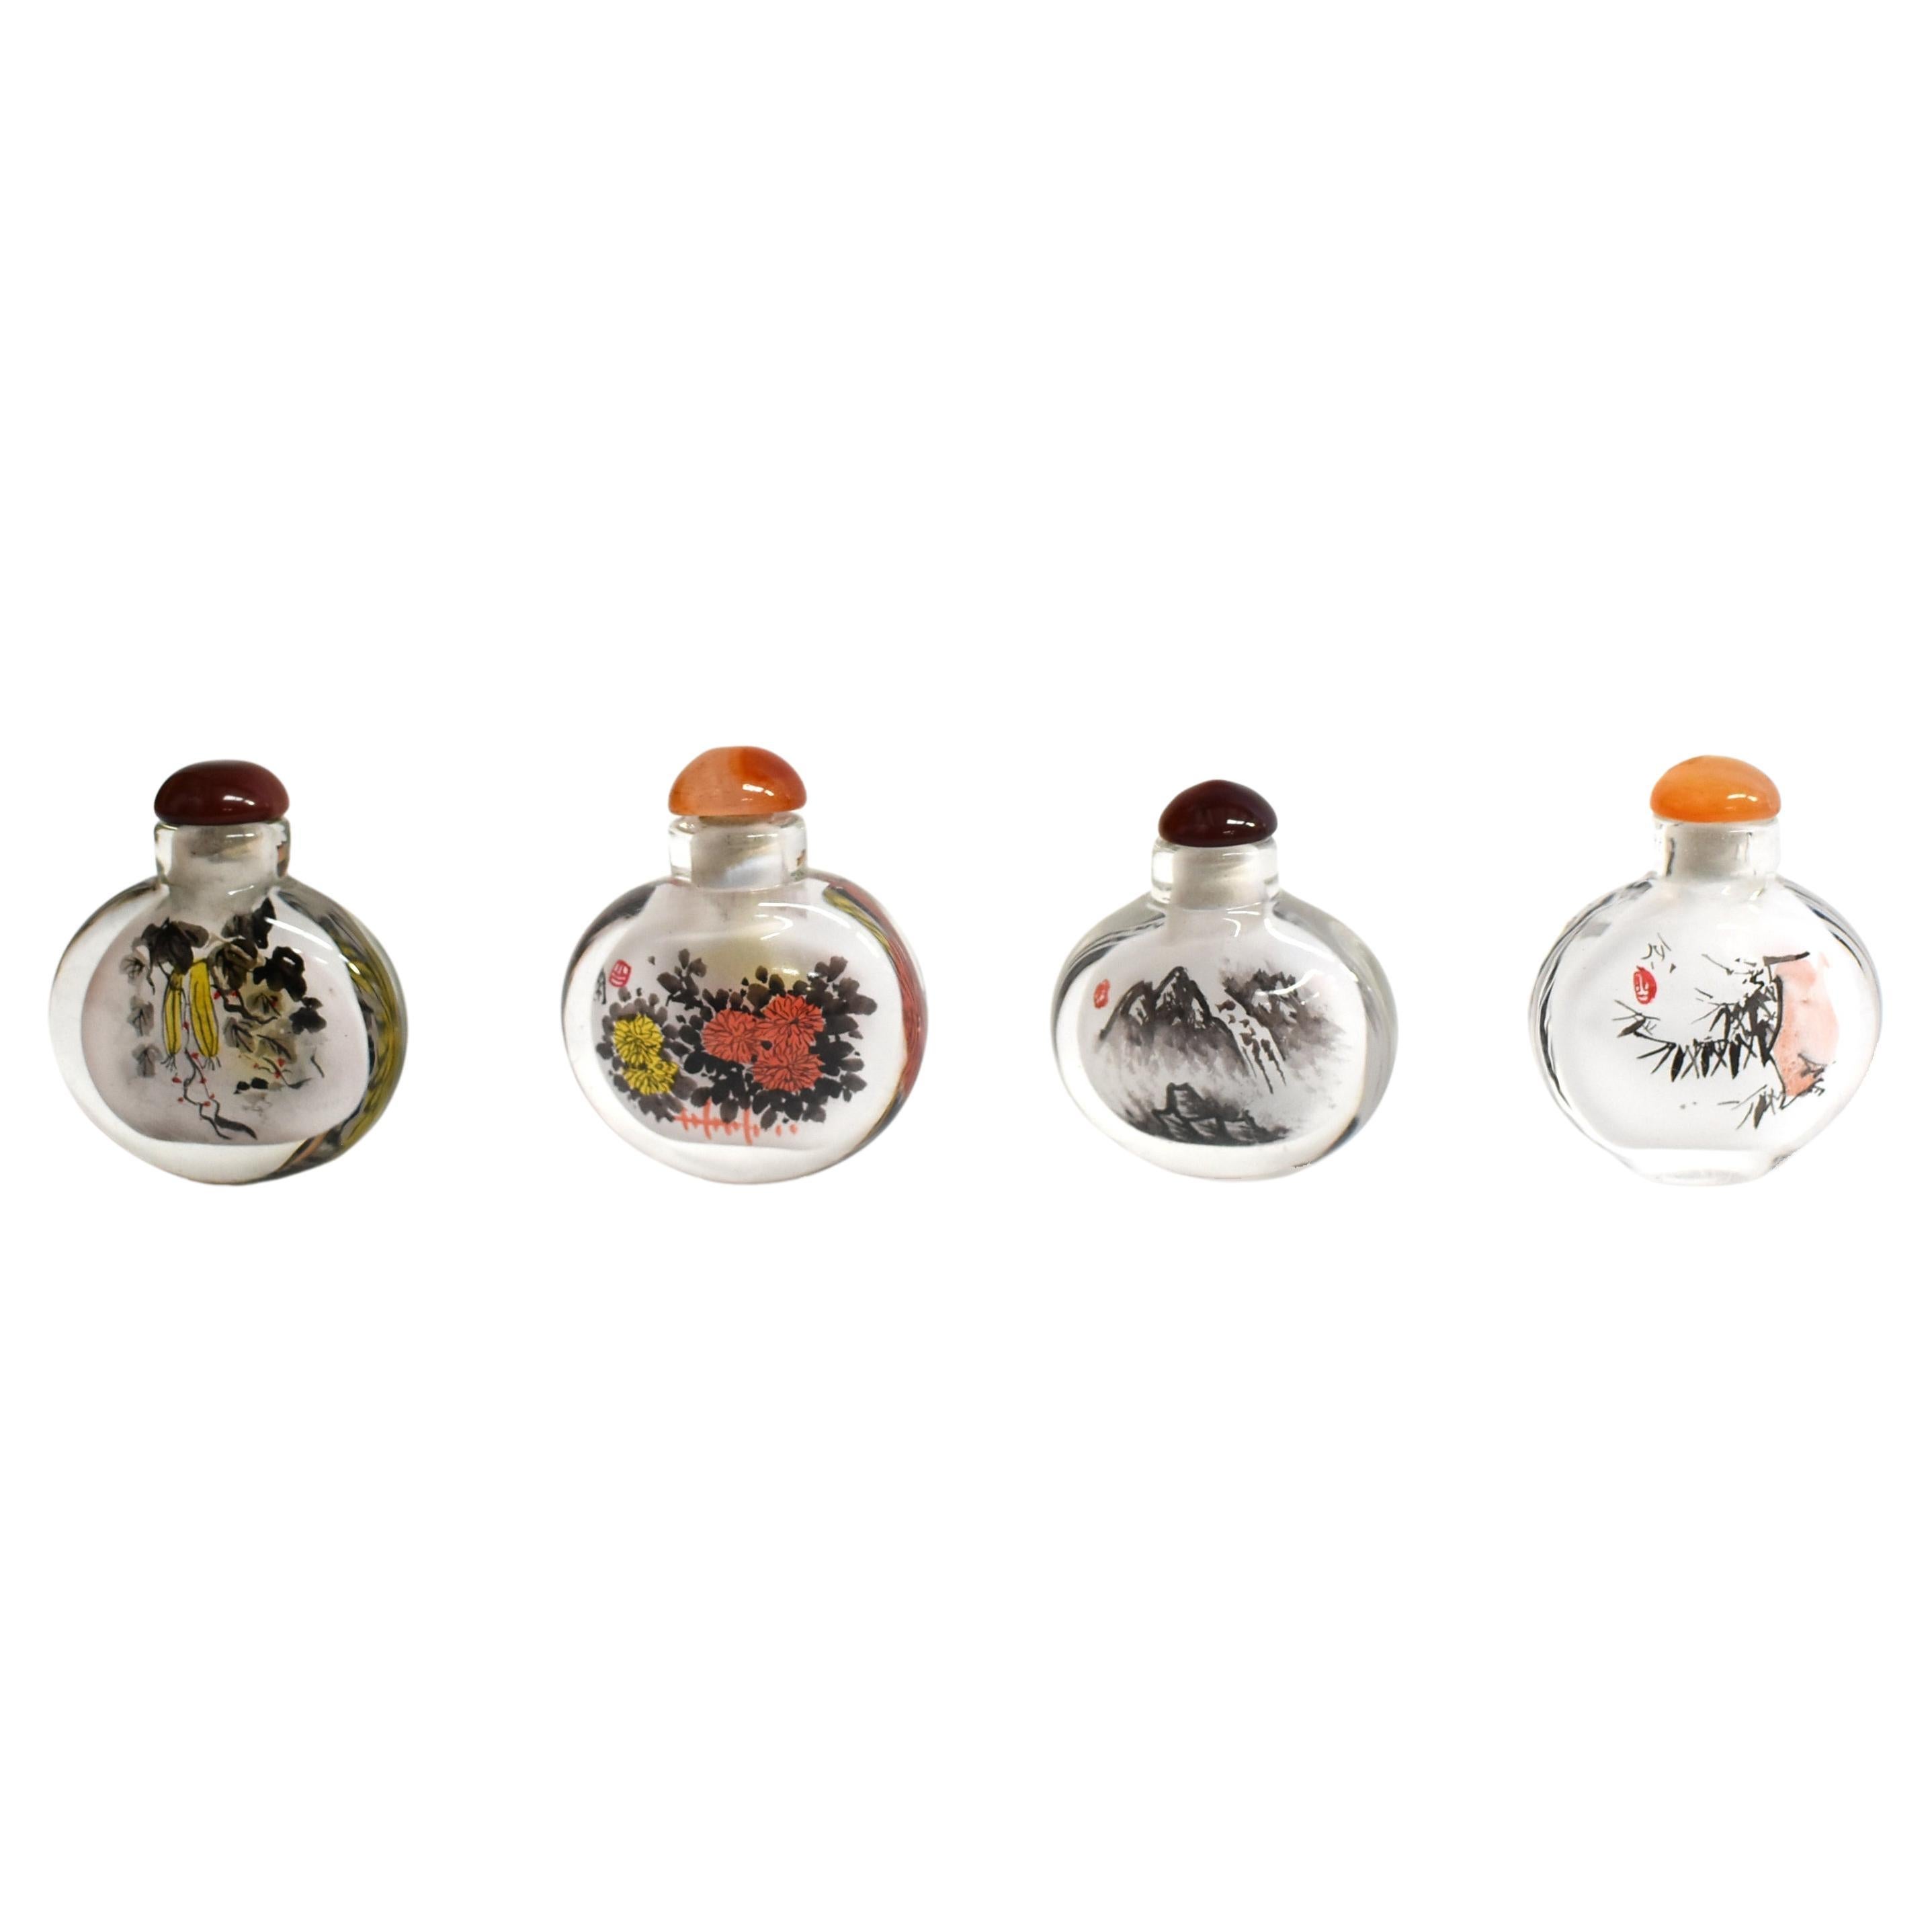 Four Snuff Bottles Inside Painted Natures Plants